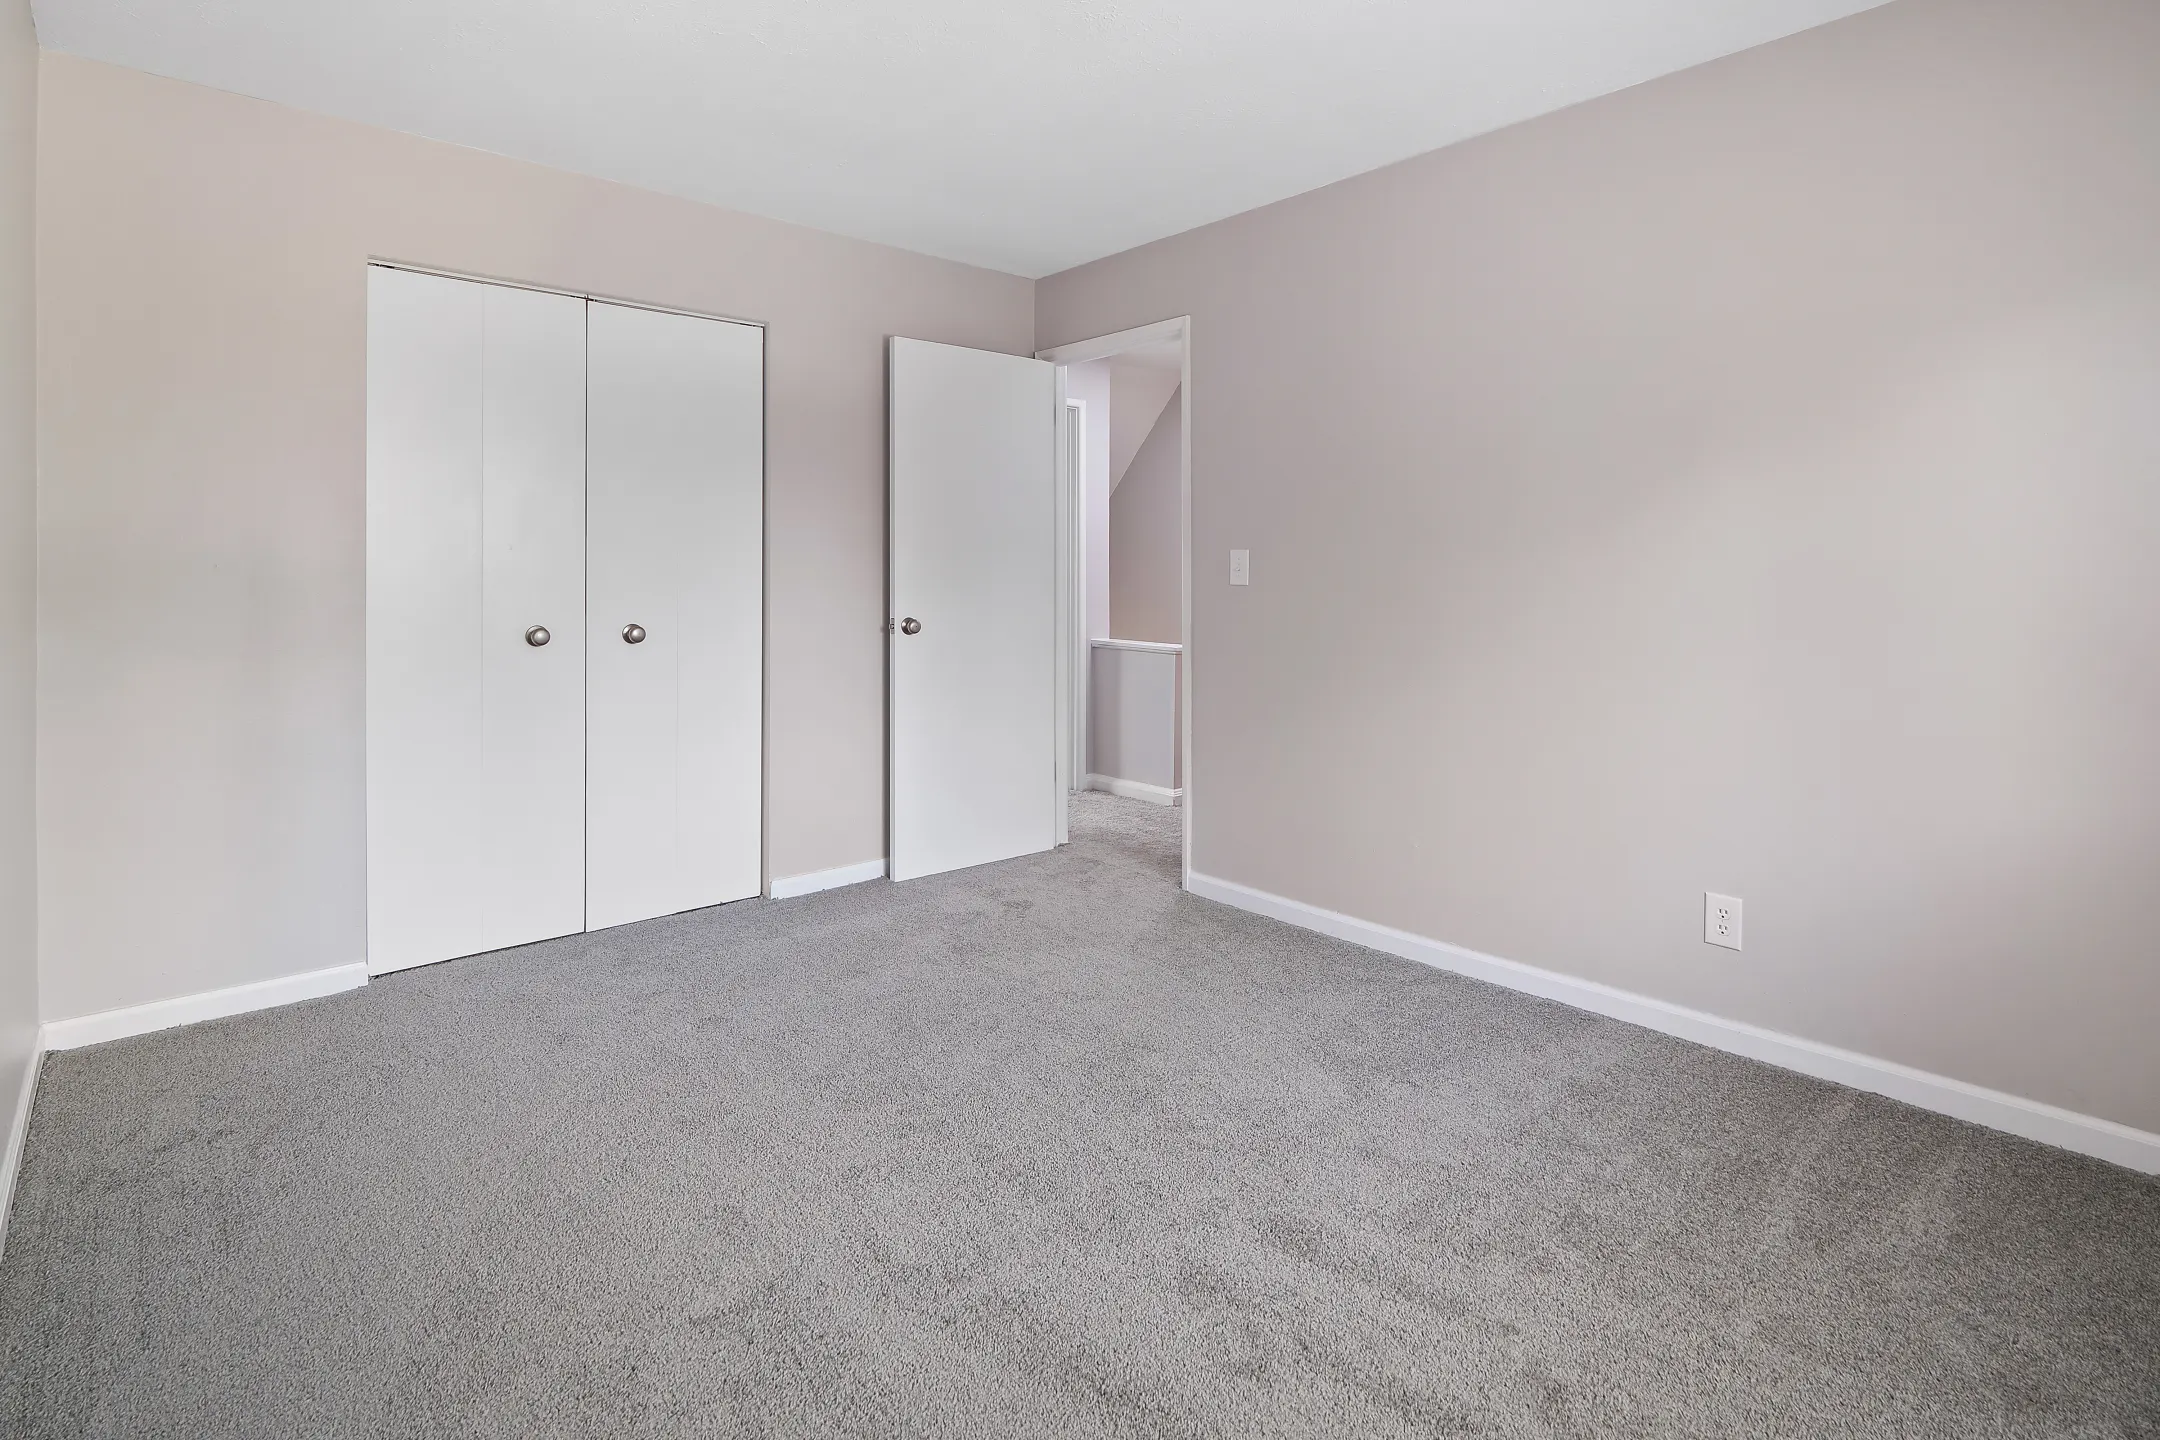 Bedroom - Concord Townhomes - Mentor, OH